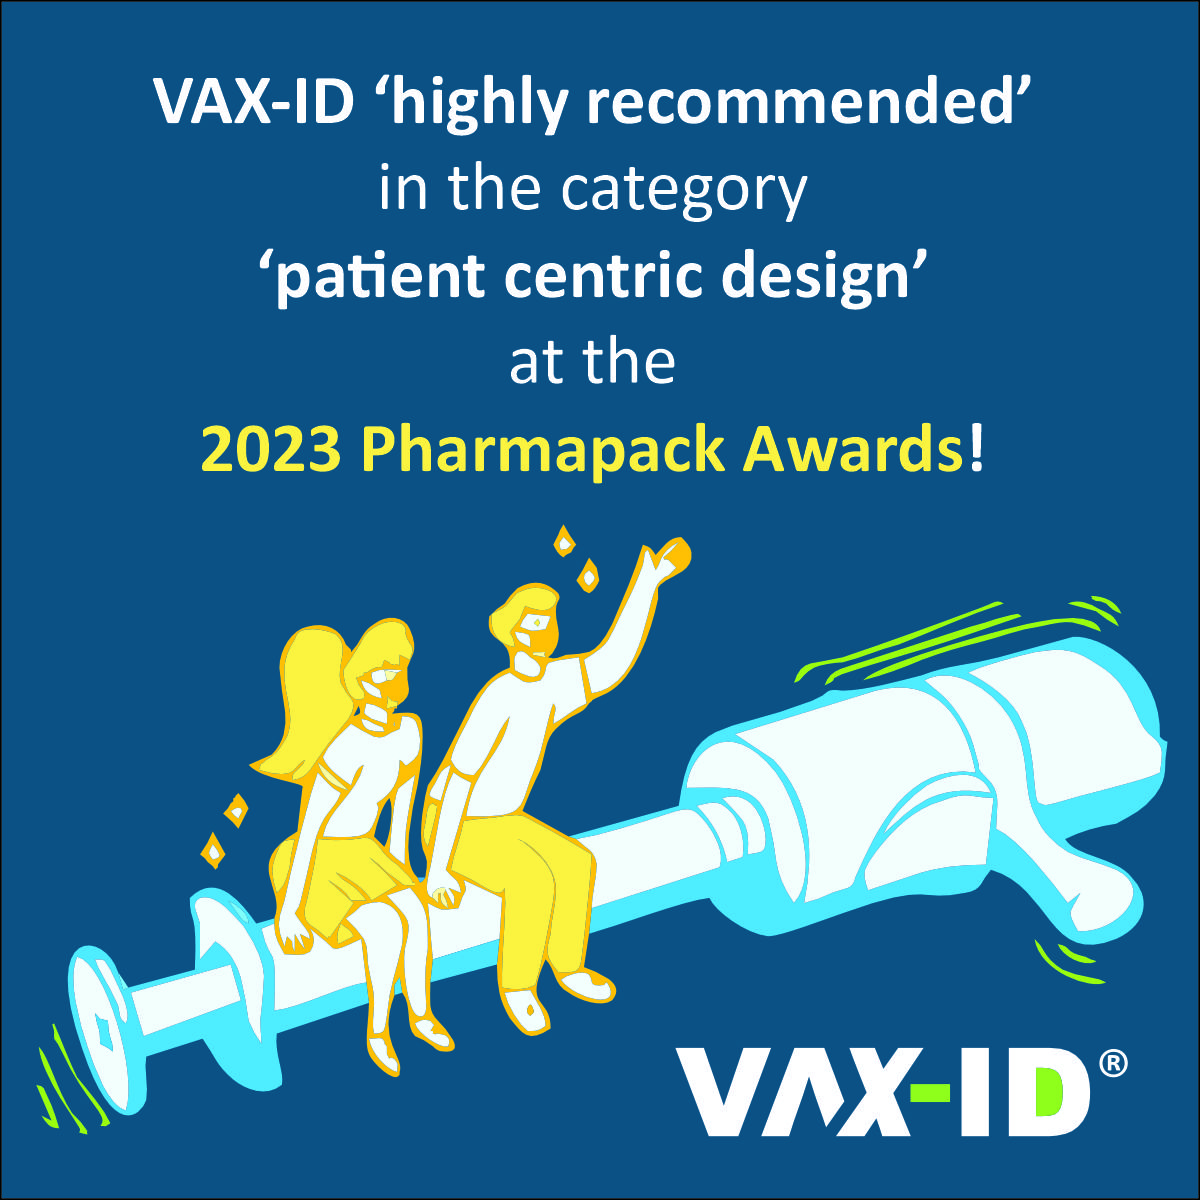 VAX-ID 'Highly Recommended' in the category 'Patient Centric Design' at the 2023 Pharmapack Award